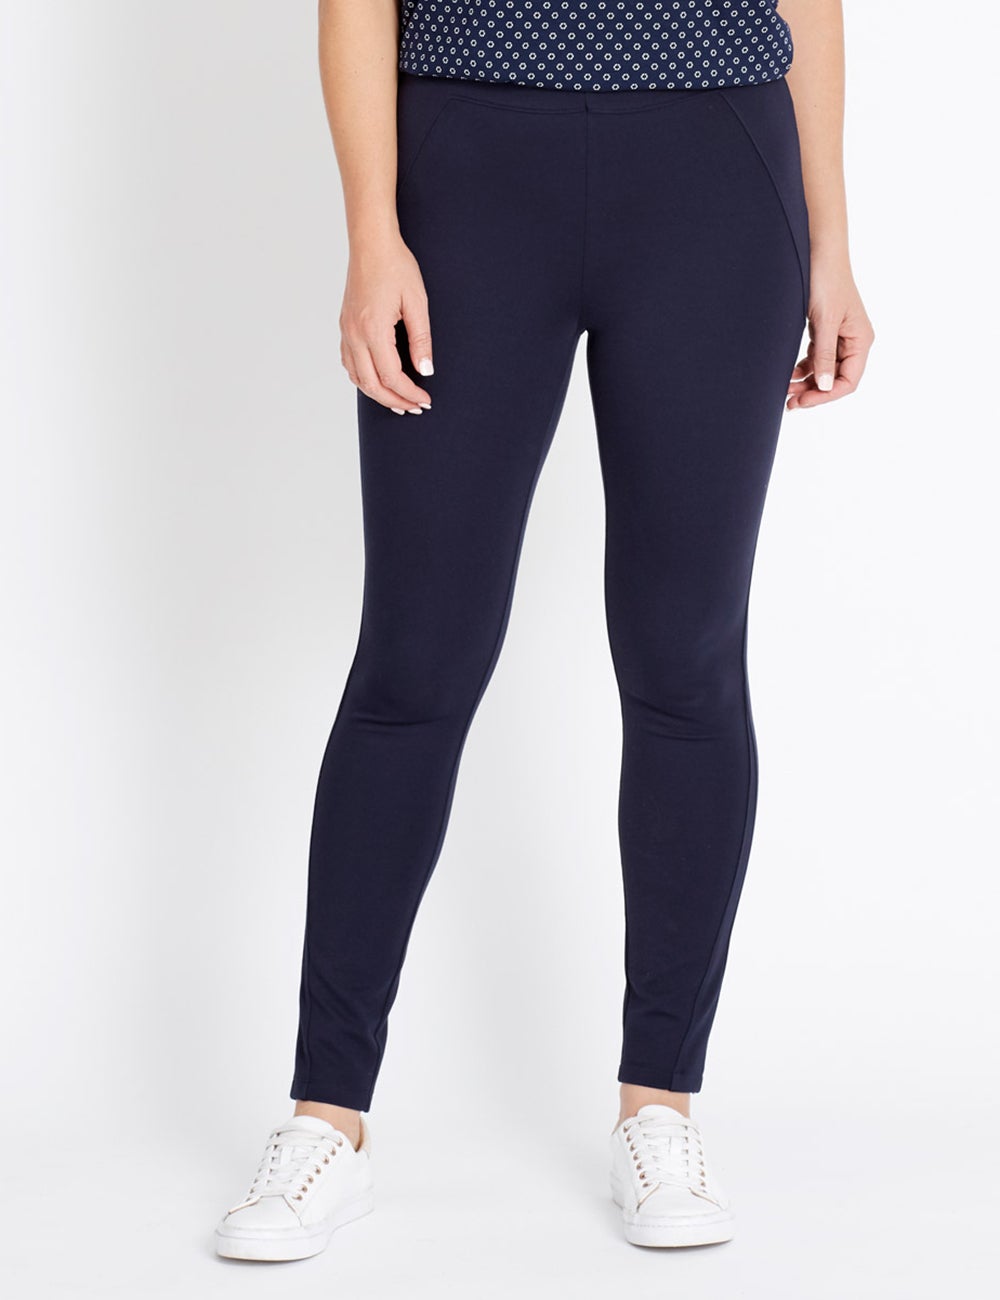 5 Most Flattering Black Pants for Busy Mums